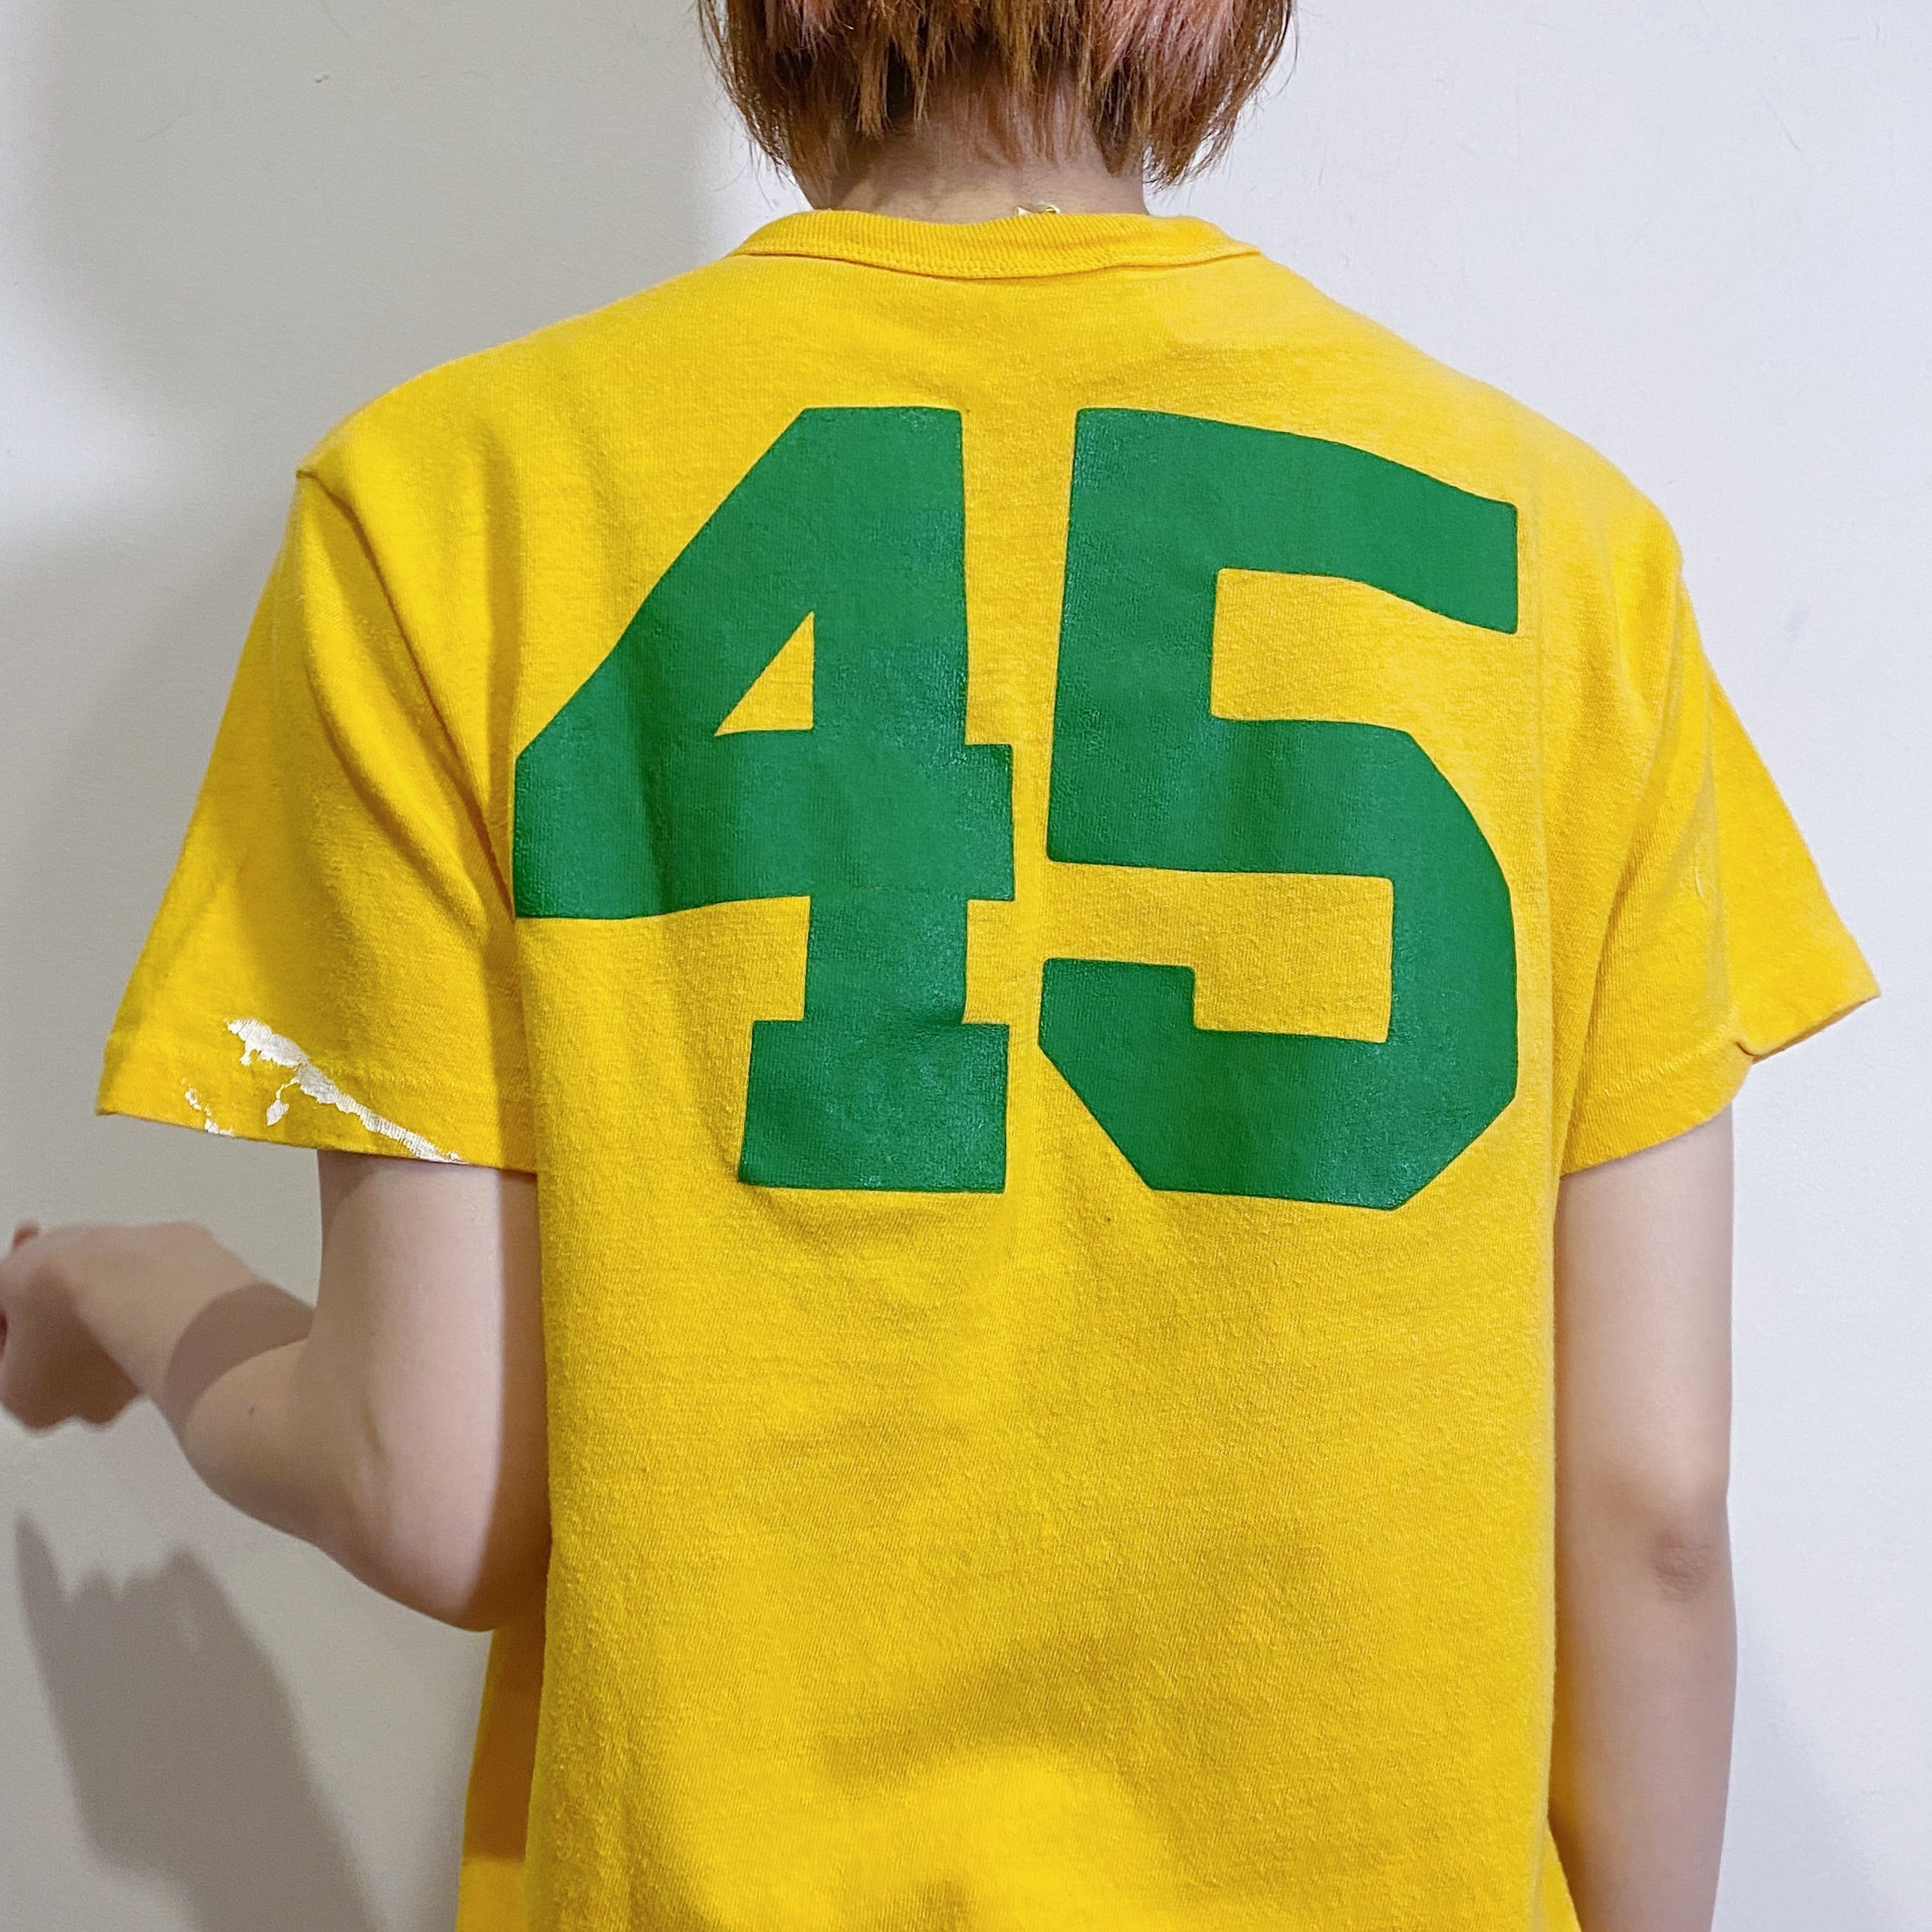 70s yellow and green numbering tee